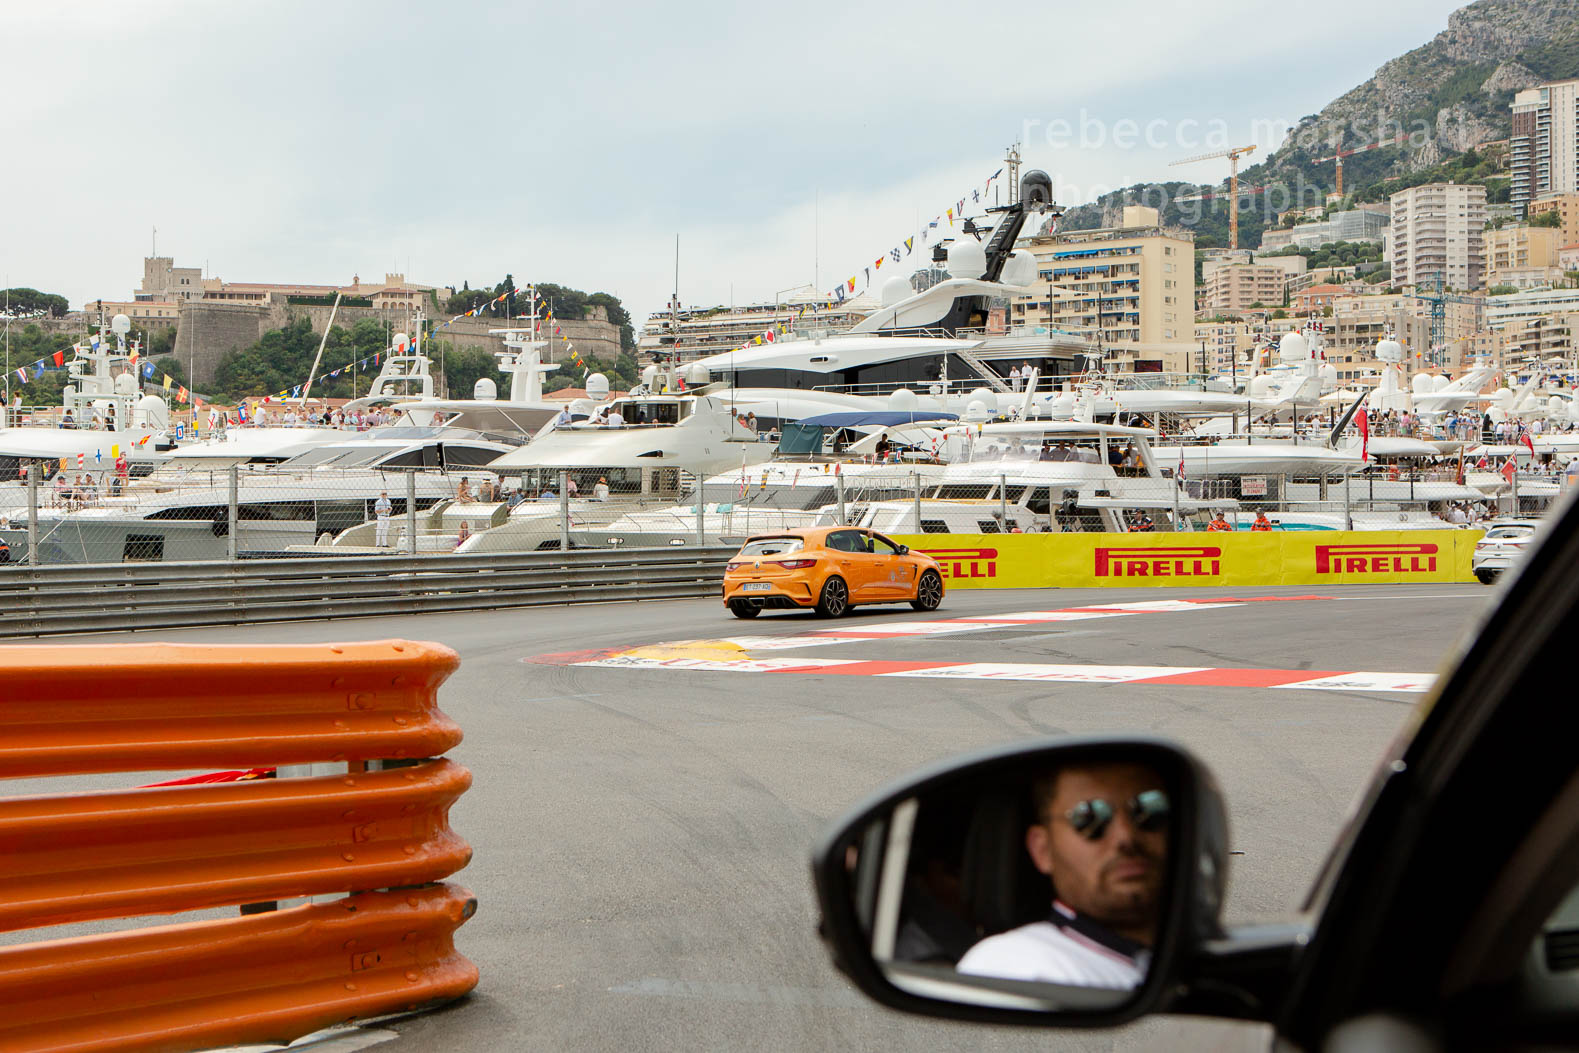 Photograph taken from inside a car driving round the race track of the Monaco Grand Pris showing harbour in background